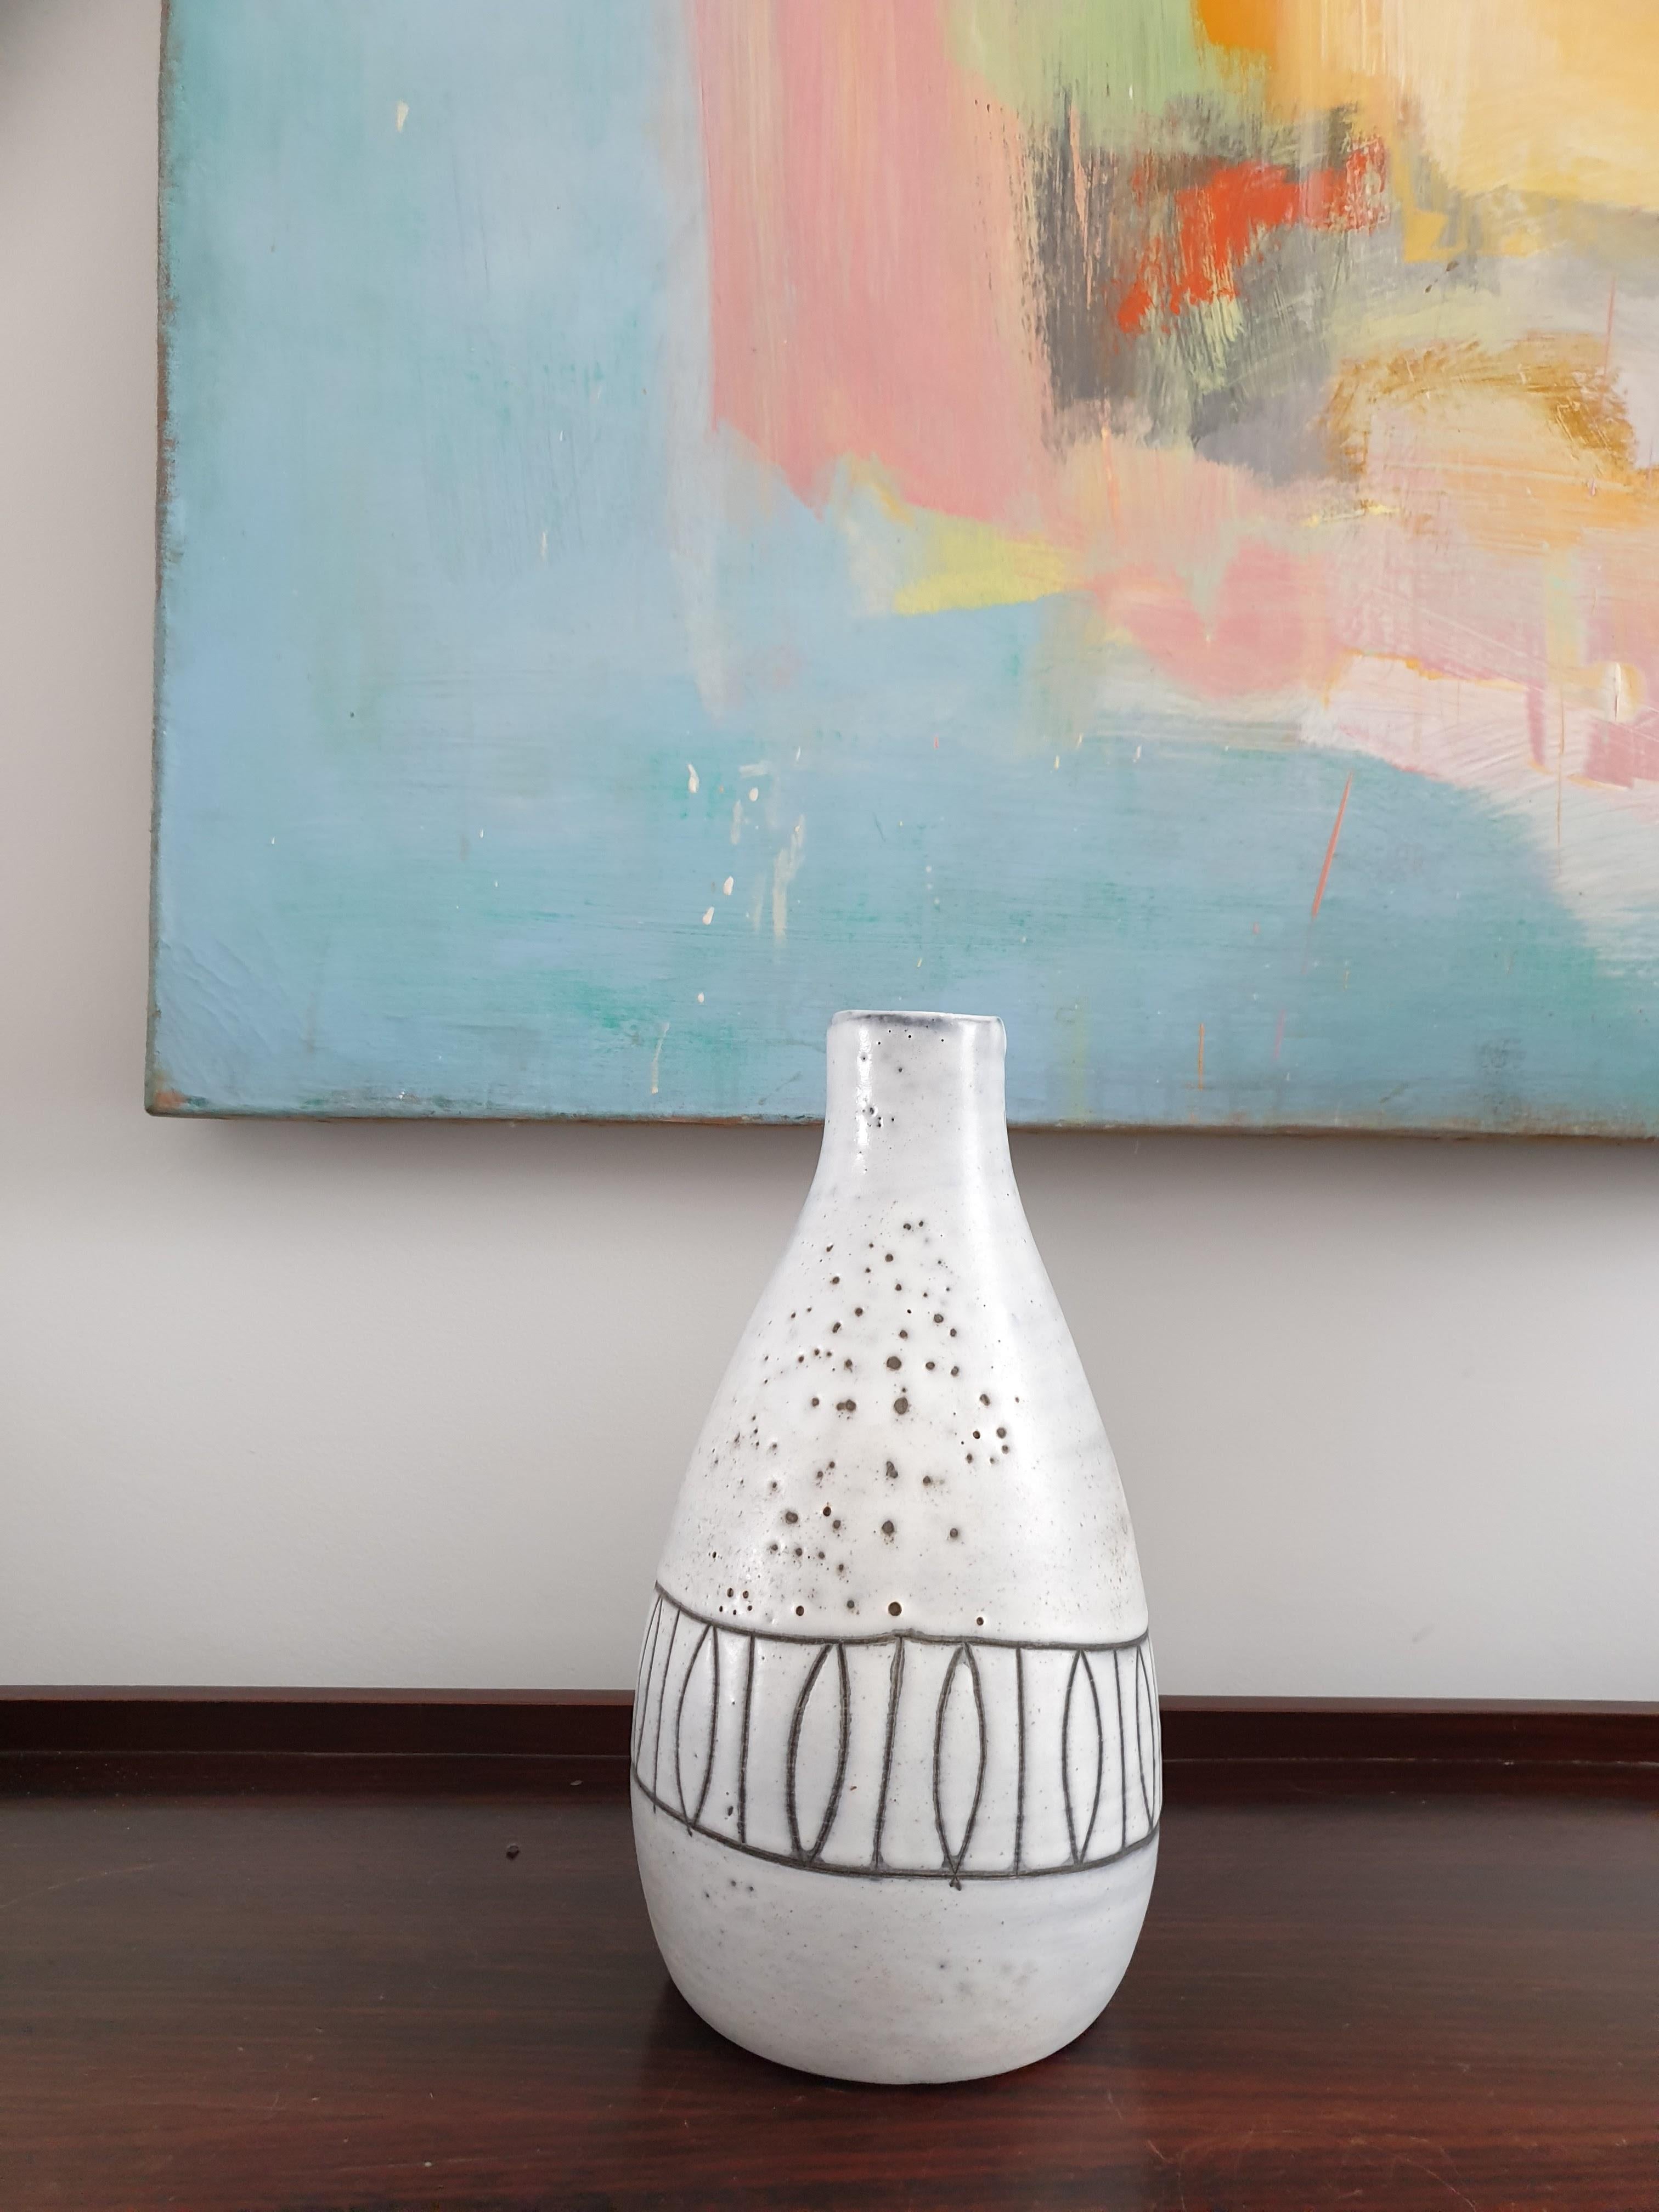 Ceramic stoneware vase by Atelier Dieulfit, France, signed to base. The simple abstract decoration of the vase would fit in well with a contemporary interior as would the cool grey detail. The vase has a hand made, artisan feel to it which gives it